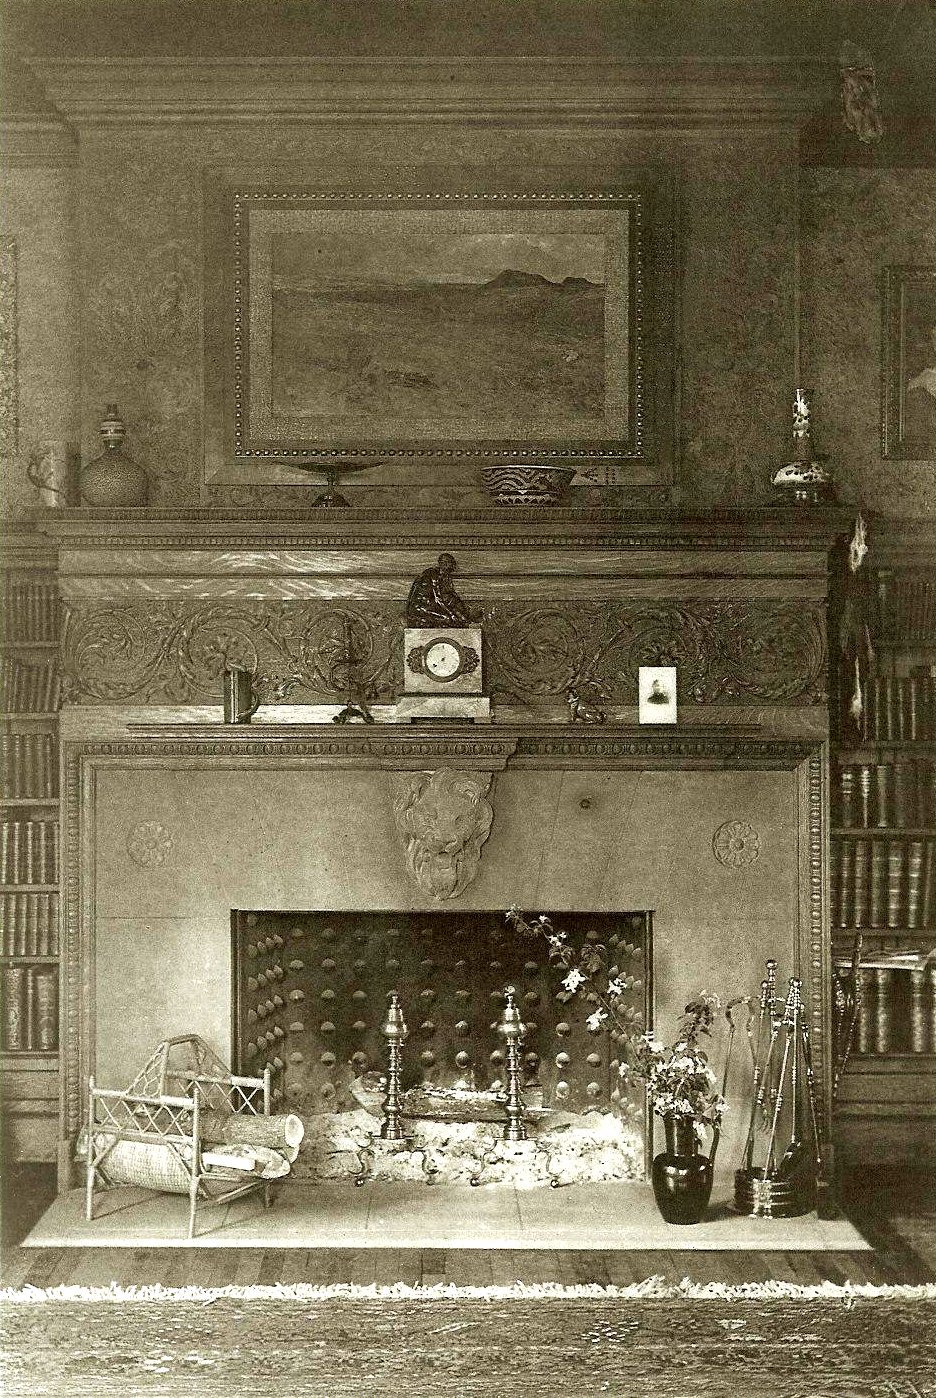 Hinkle-Murphy House, 1886 619 South 10th Street Minneapolis, Minnesota Architect: William Channing Whitney 1st FL front entrance hall room to left: Fireplace Northwestern Architect Supplement Vol. 6. No. 7 1886 Minneapolis Library History Collection